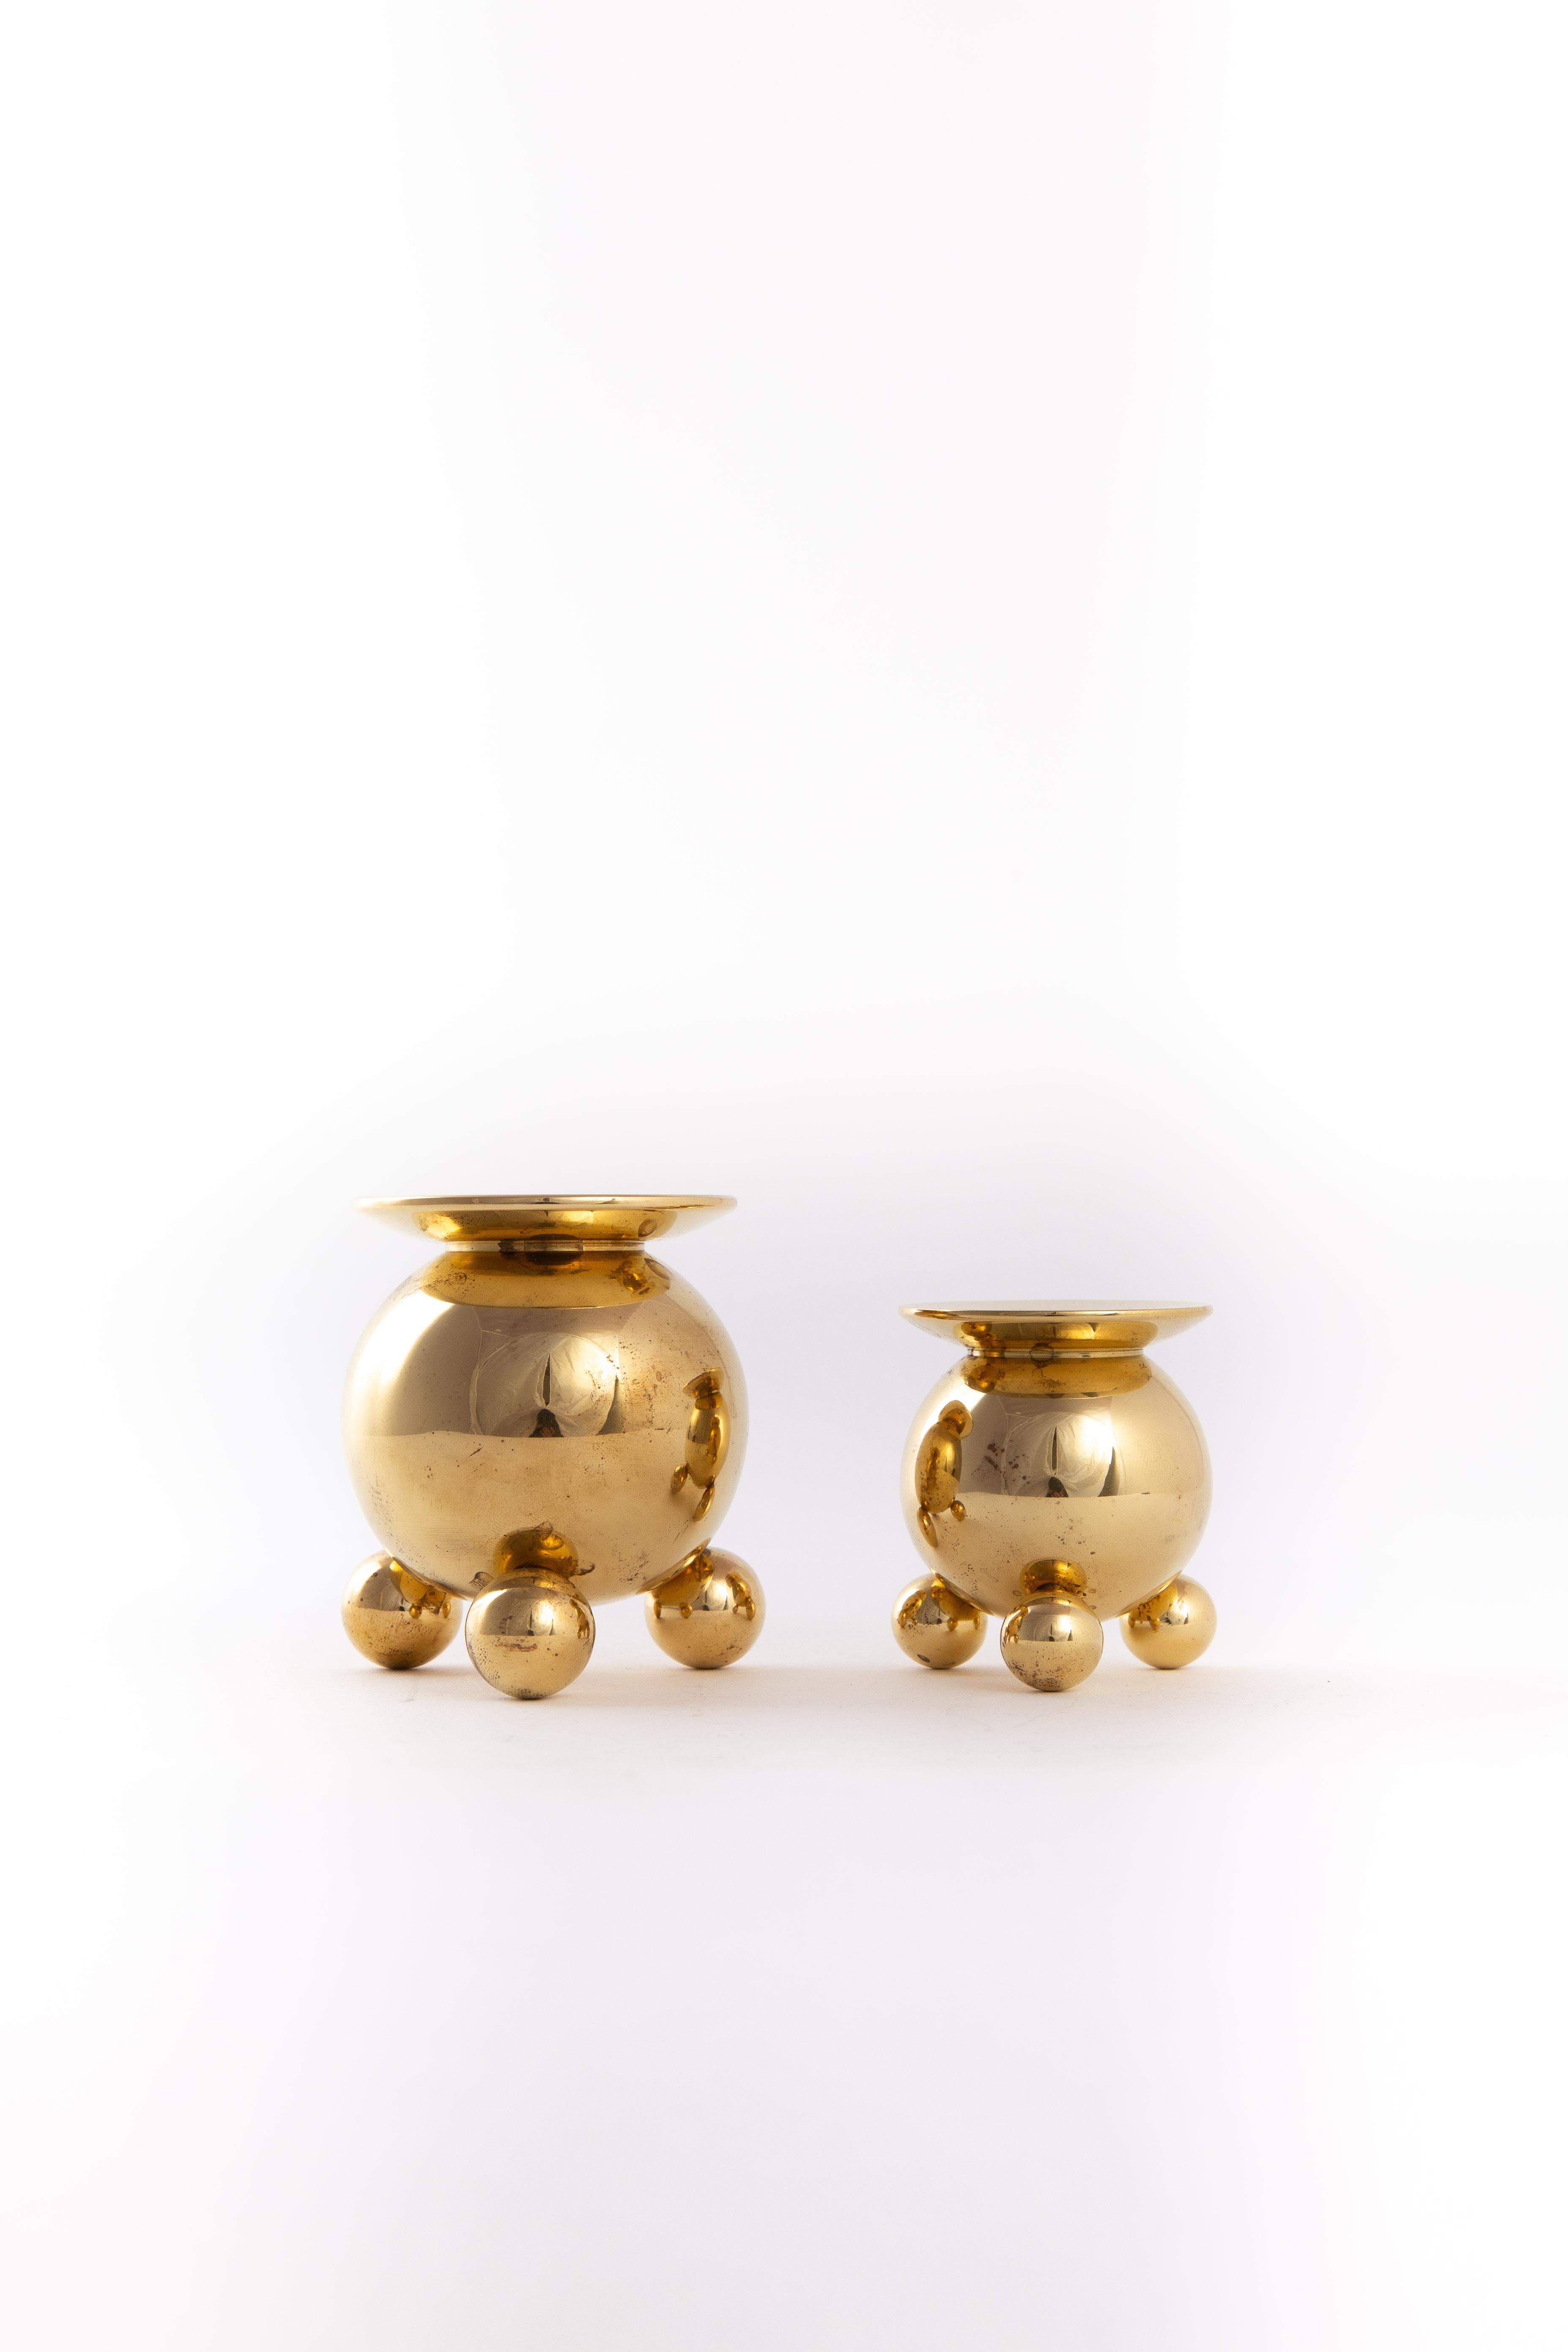 Two very heavy brass metal candleholders. Marked on the bottom. Size of the diameter for the candles is 20mm.
Two sizes:
Big candleholder diameter 7 cm and 7.5 cm high
Smaller candleholder diameter 5.4 cm and 6 cm high.